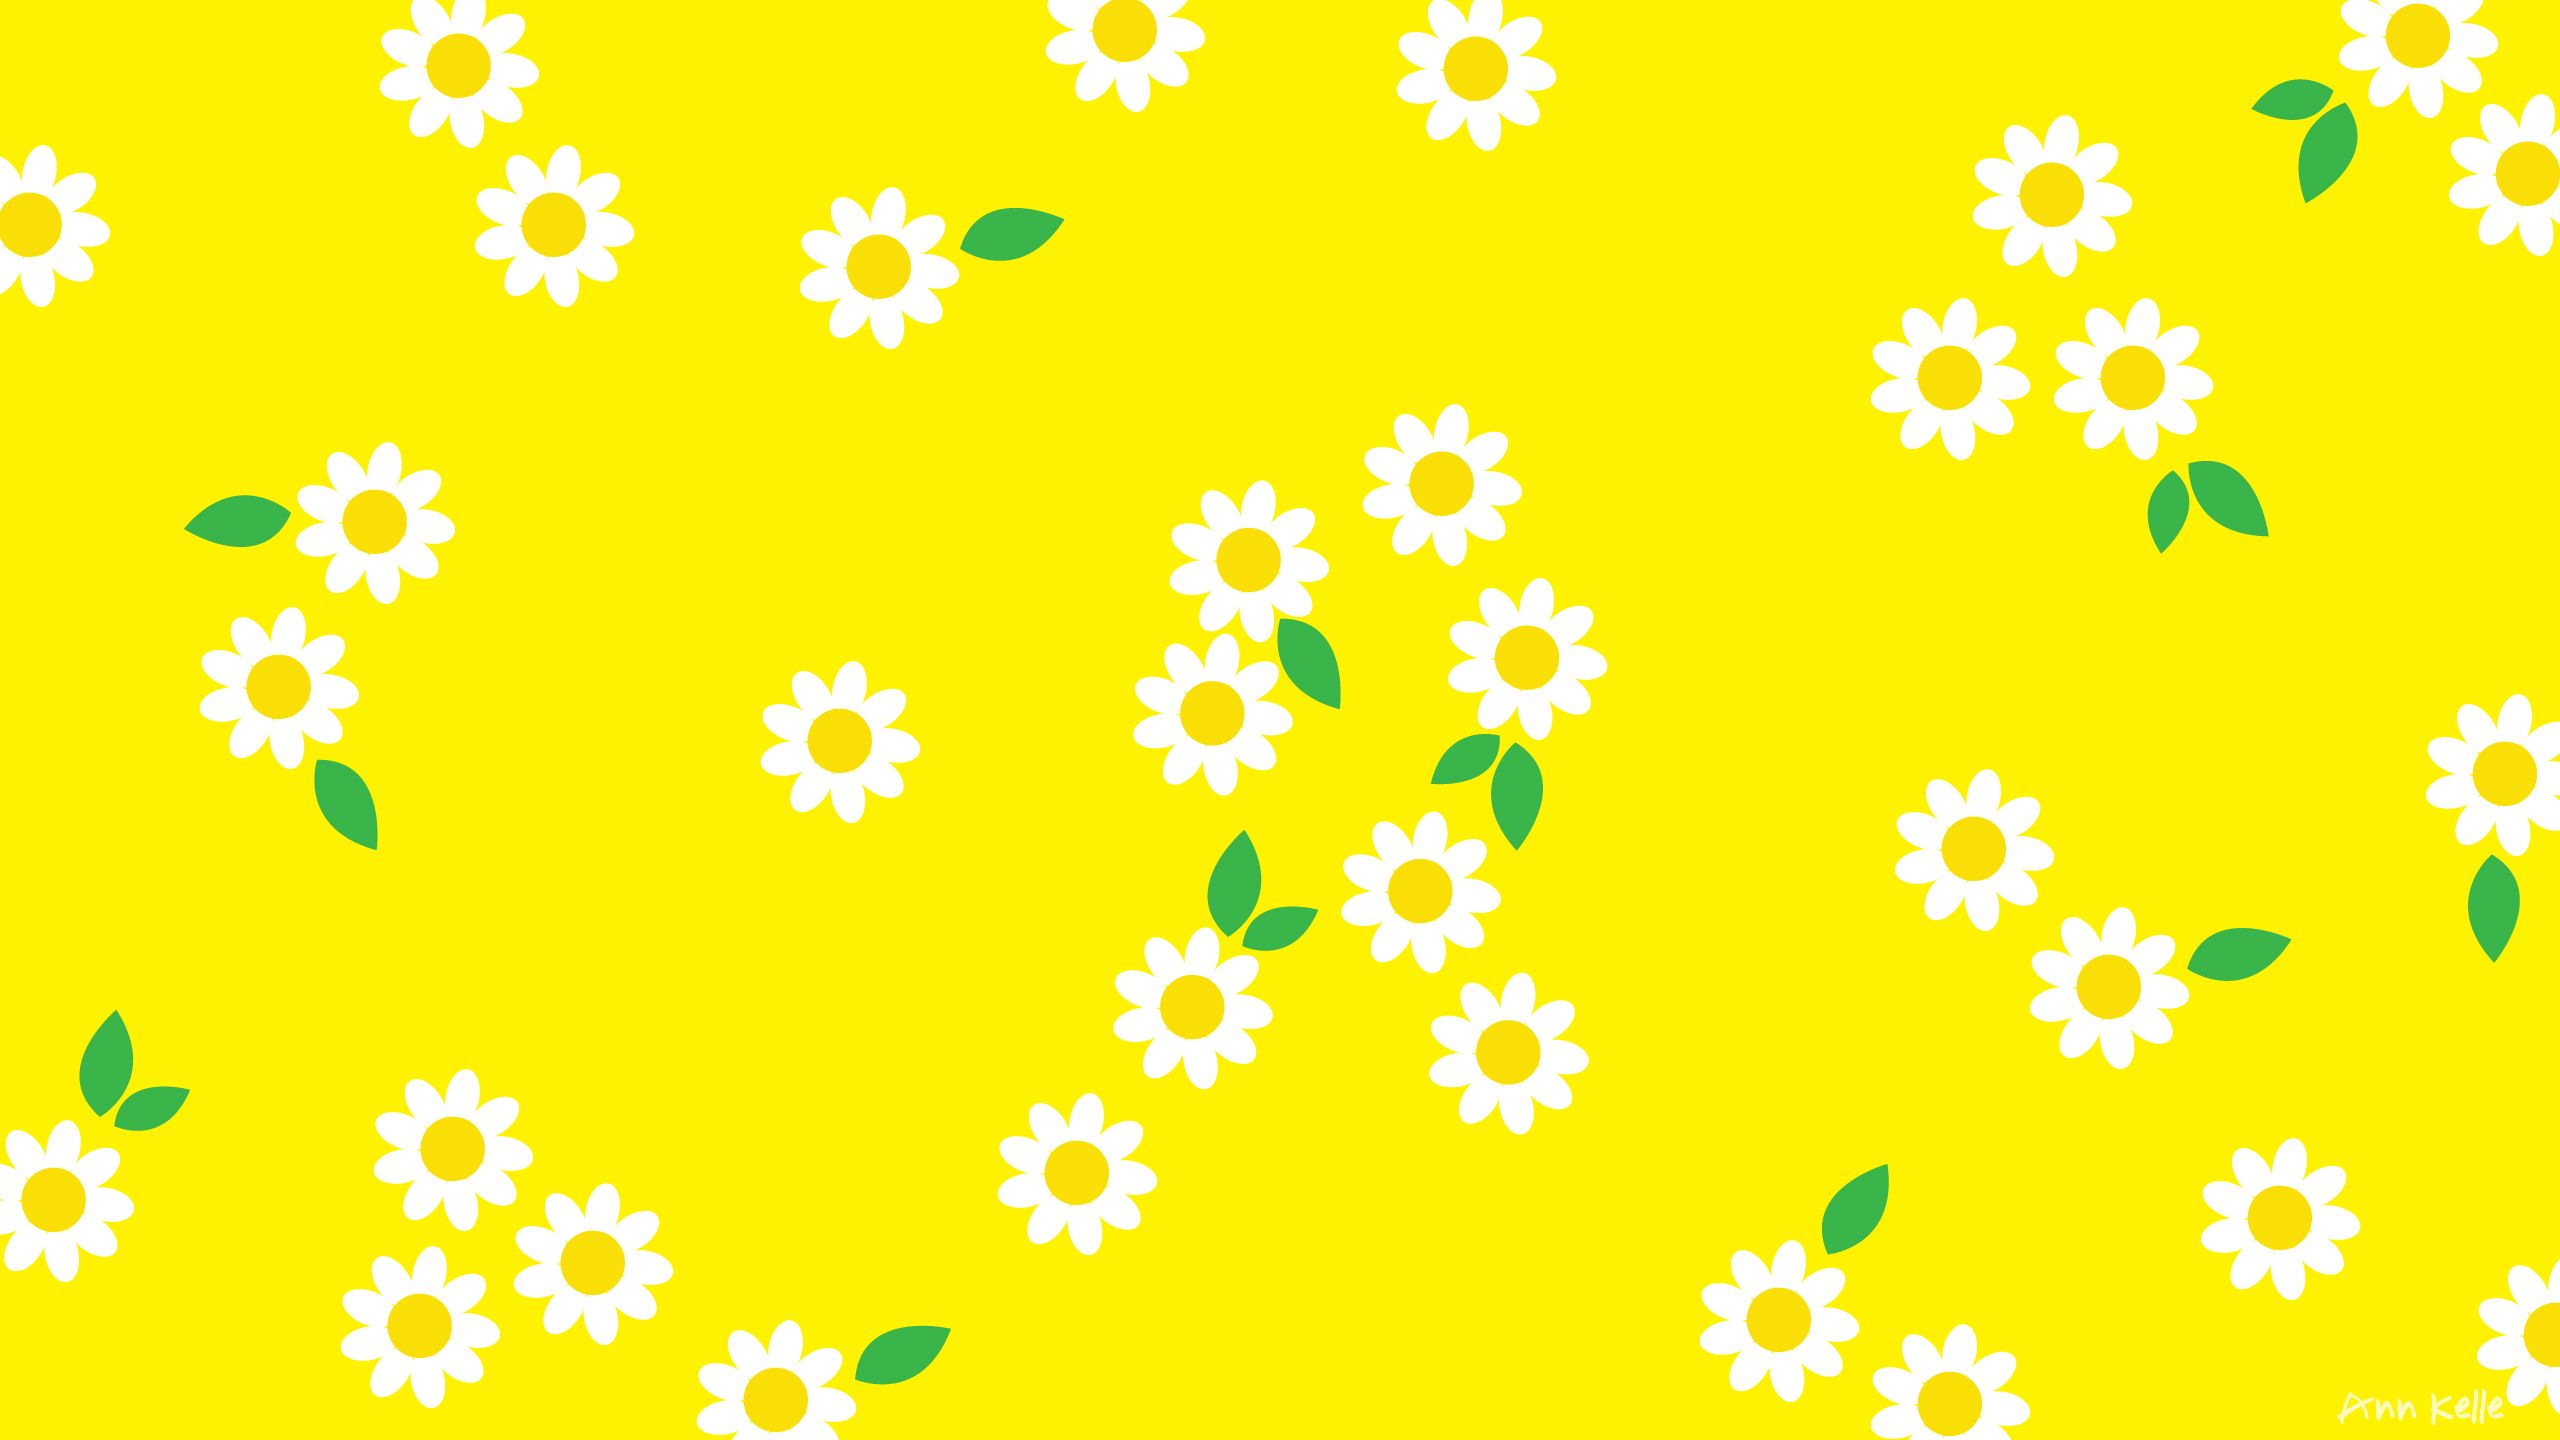 A yellow background with white flowers - Light yellow, pastel yellow, yellow